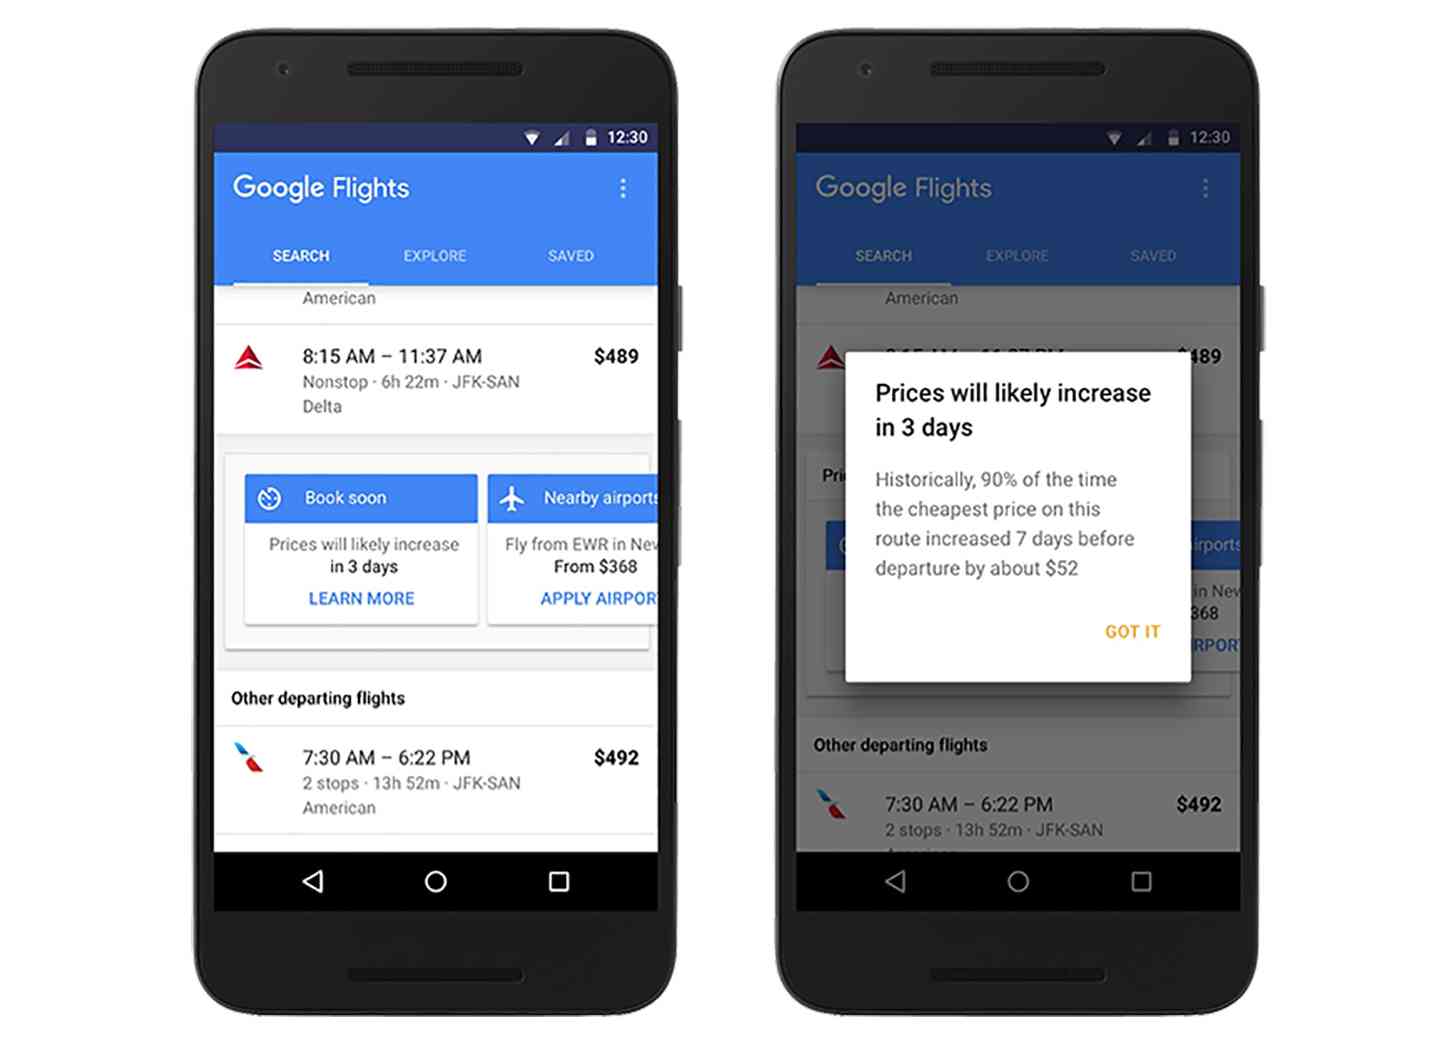 Google Flights expected price increase